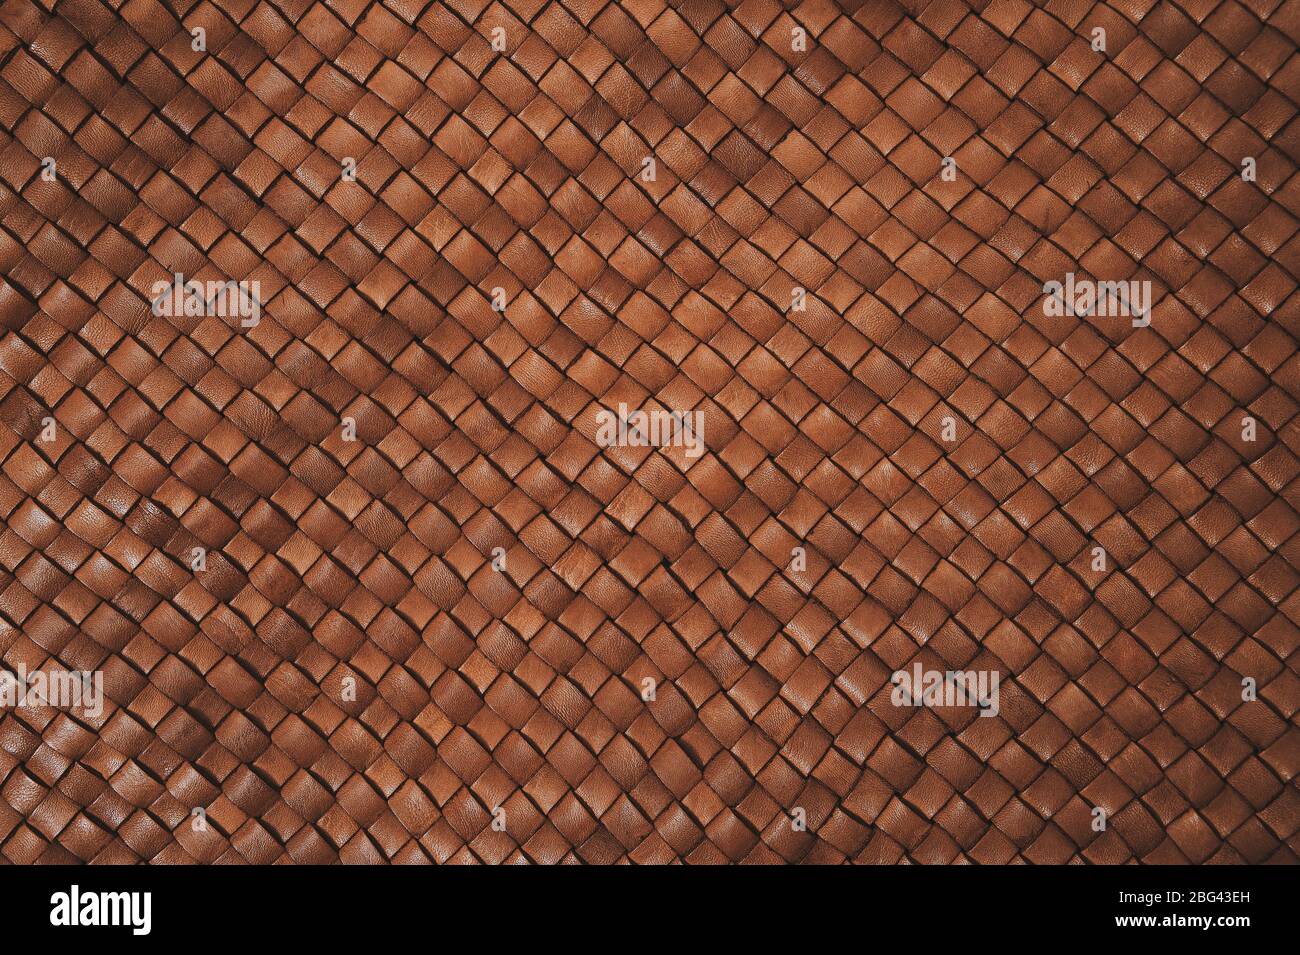 Vintage brown braided leather texture. Leather woven together. Abstract clothing background. Natural material. Horizontal backdrop. Stock Photo